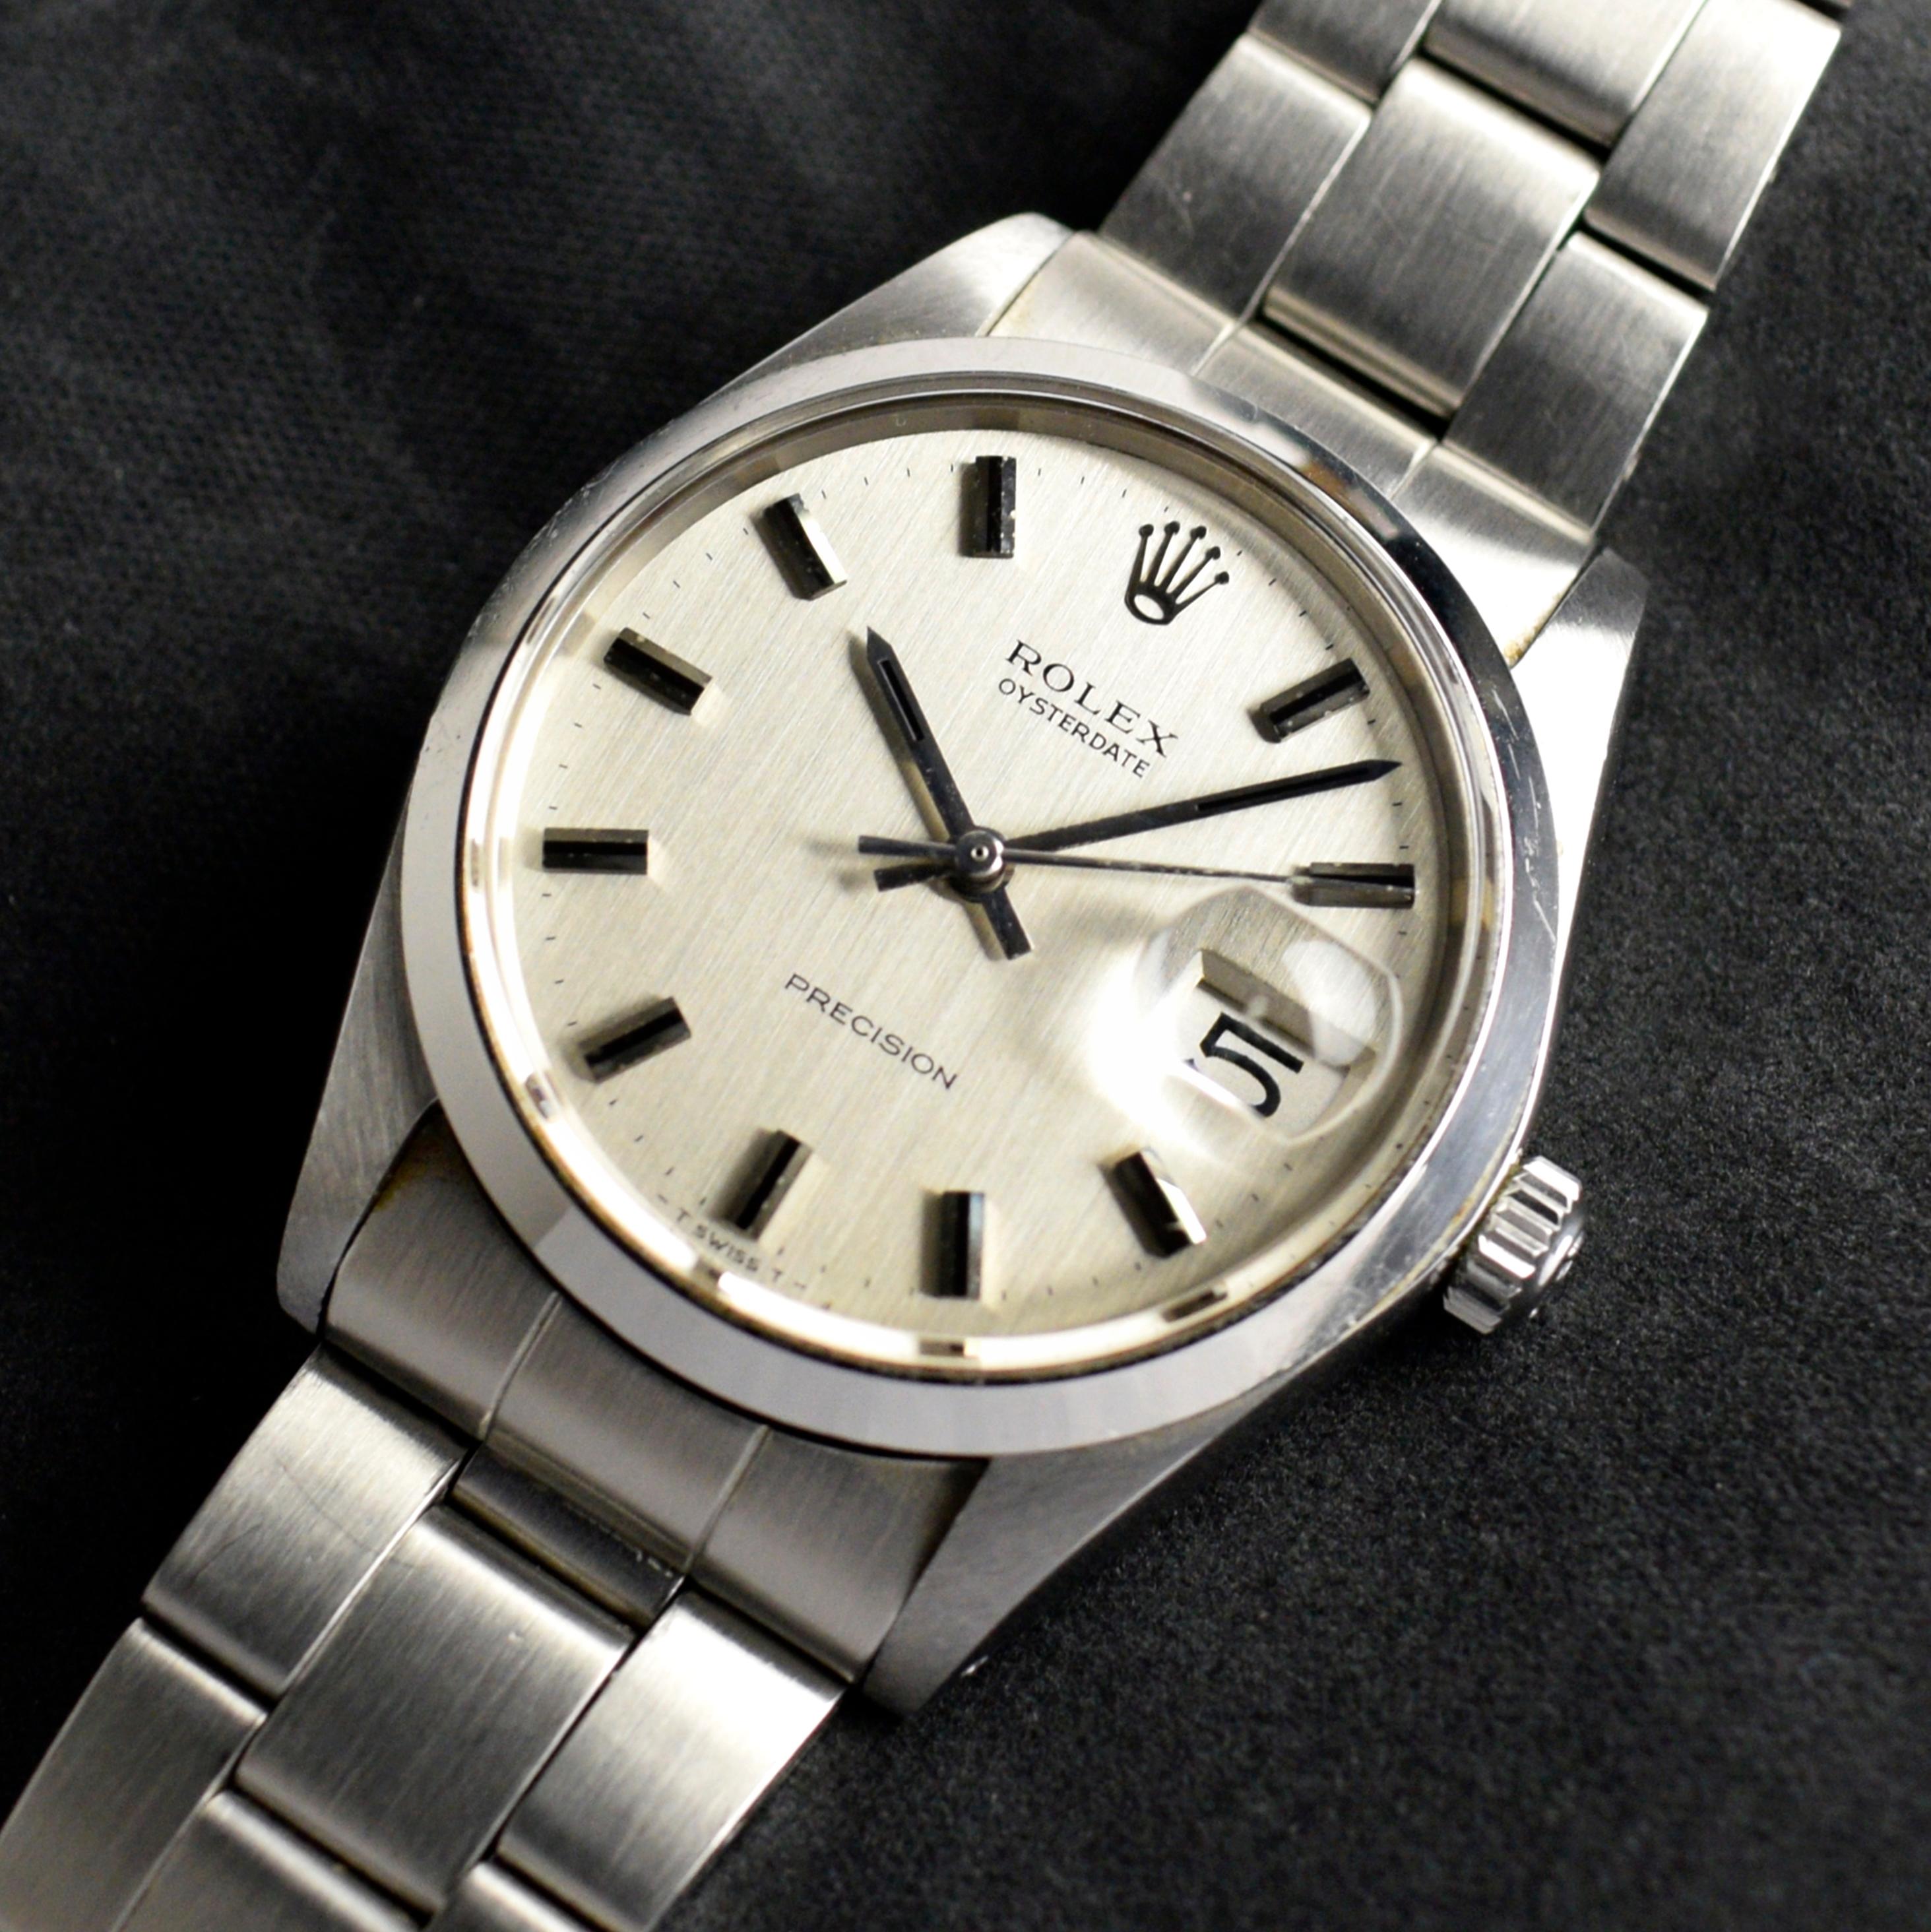 Brand: Vintage Rolex
Model: 6694
Year: 1971
Serial number: 29xxxxx
Reference: C03581

Case: 34mm without crown; Show sign of wear with slight polish from previous w/ inner case back stamped 6694 IV.71

Dial: Excellent Aged Condition Silver Dial with